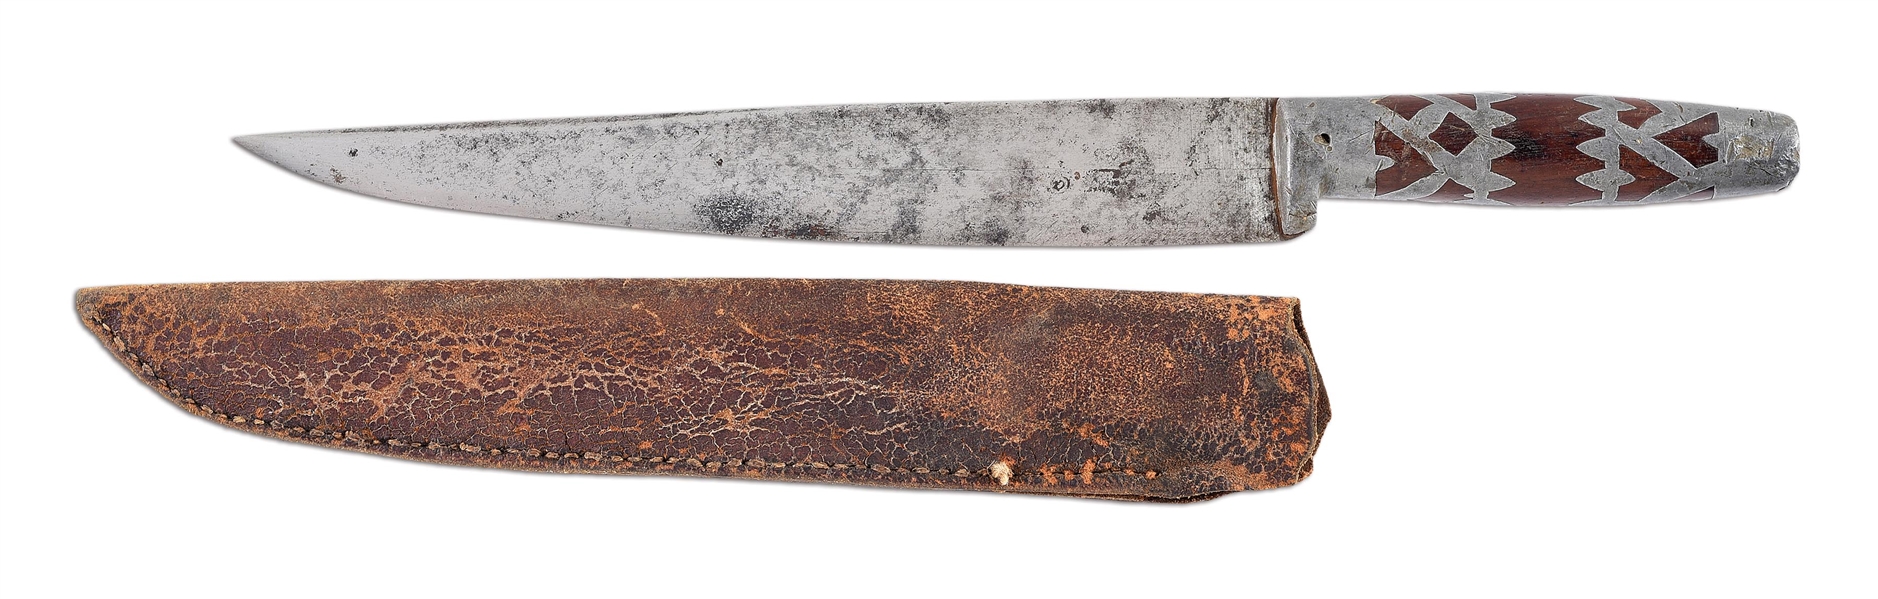 FRONTIER KNIFE WITH PEWTER INLAID HANDLE AND SCABBARD.